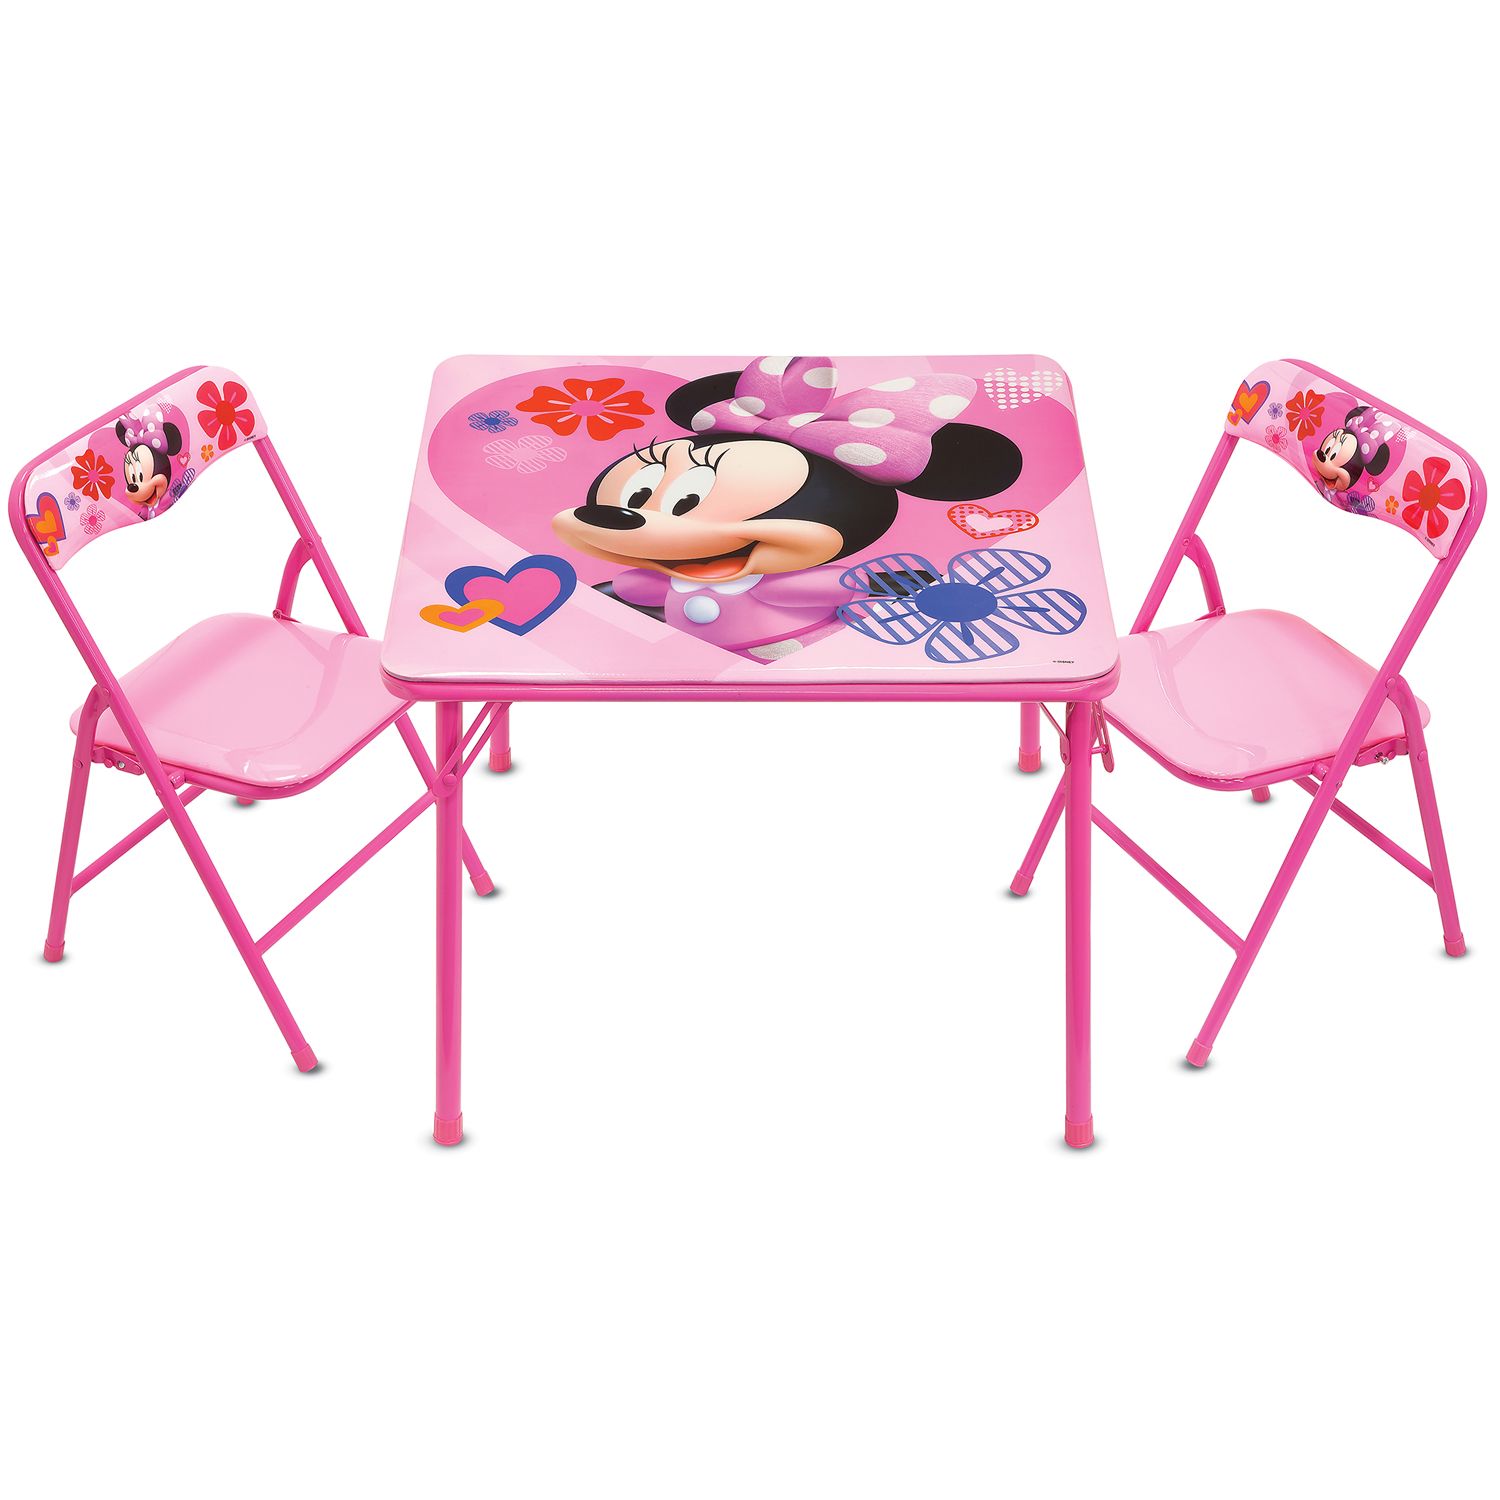 Minnie Mouse Activity Table \u0026 Chairs Set